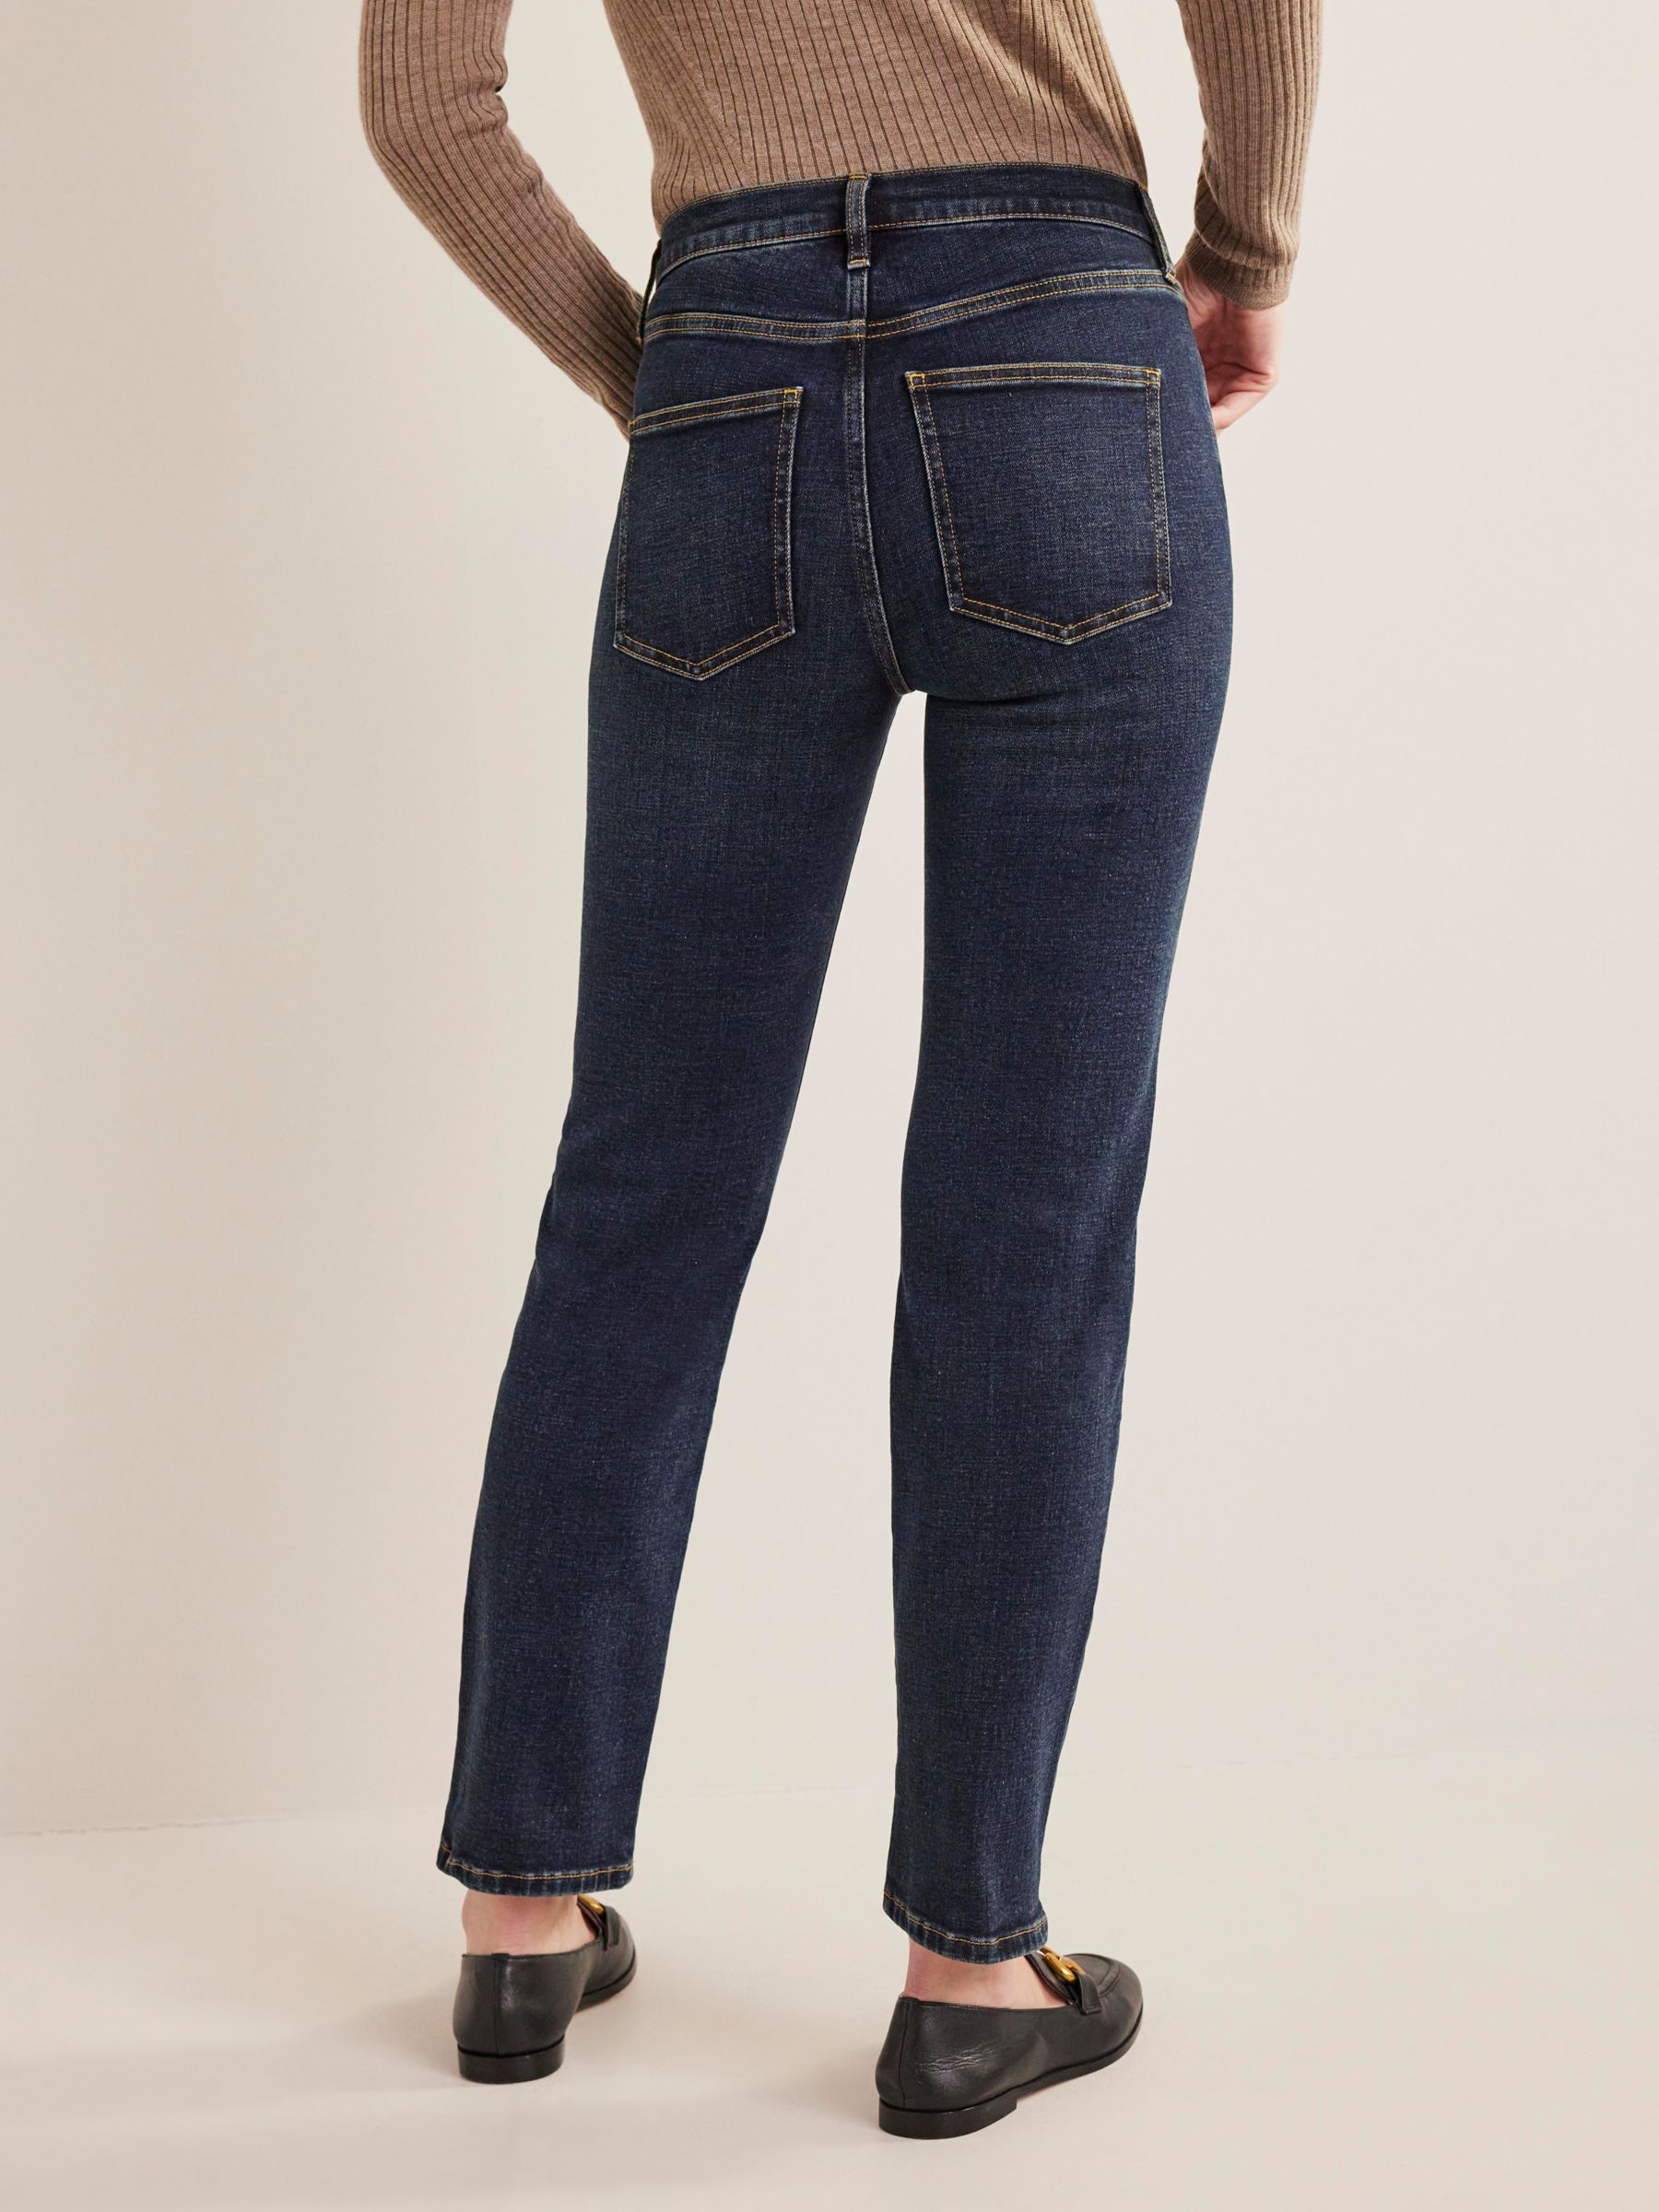 Le Silhouette Sheri Slim Jeans In Plus Size - Stunning Blue